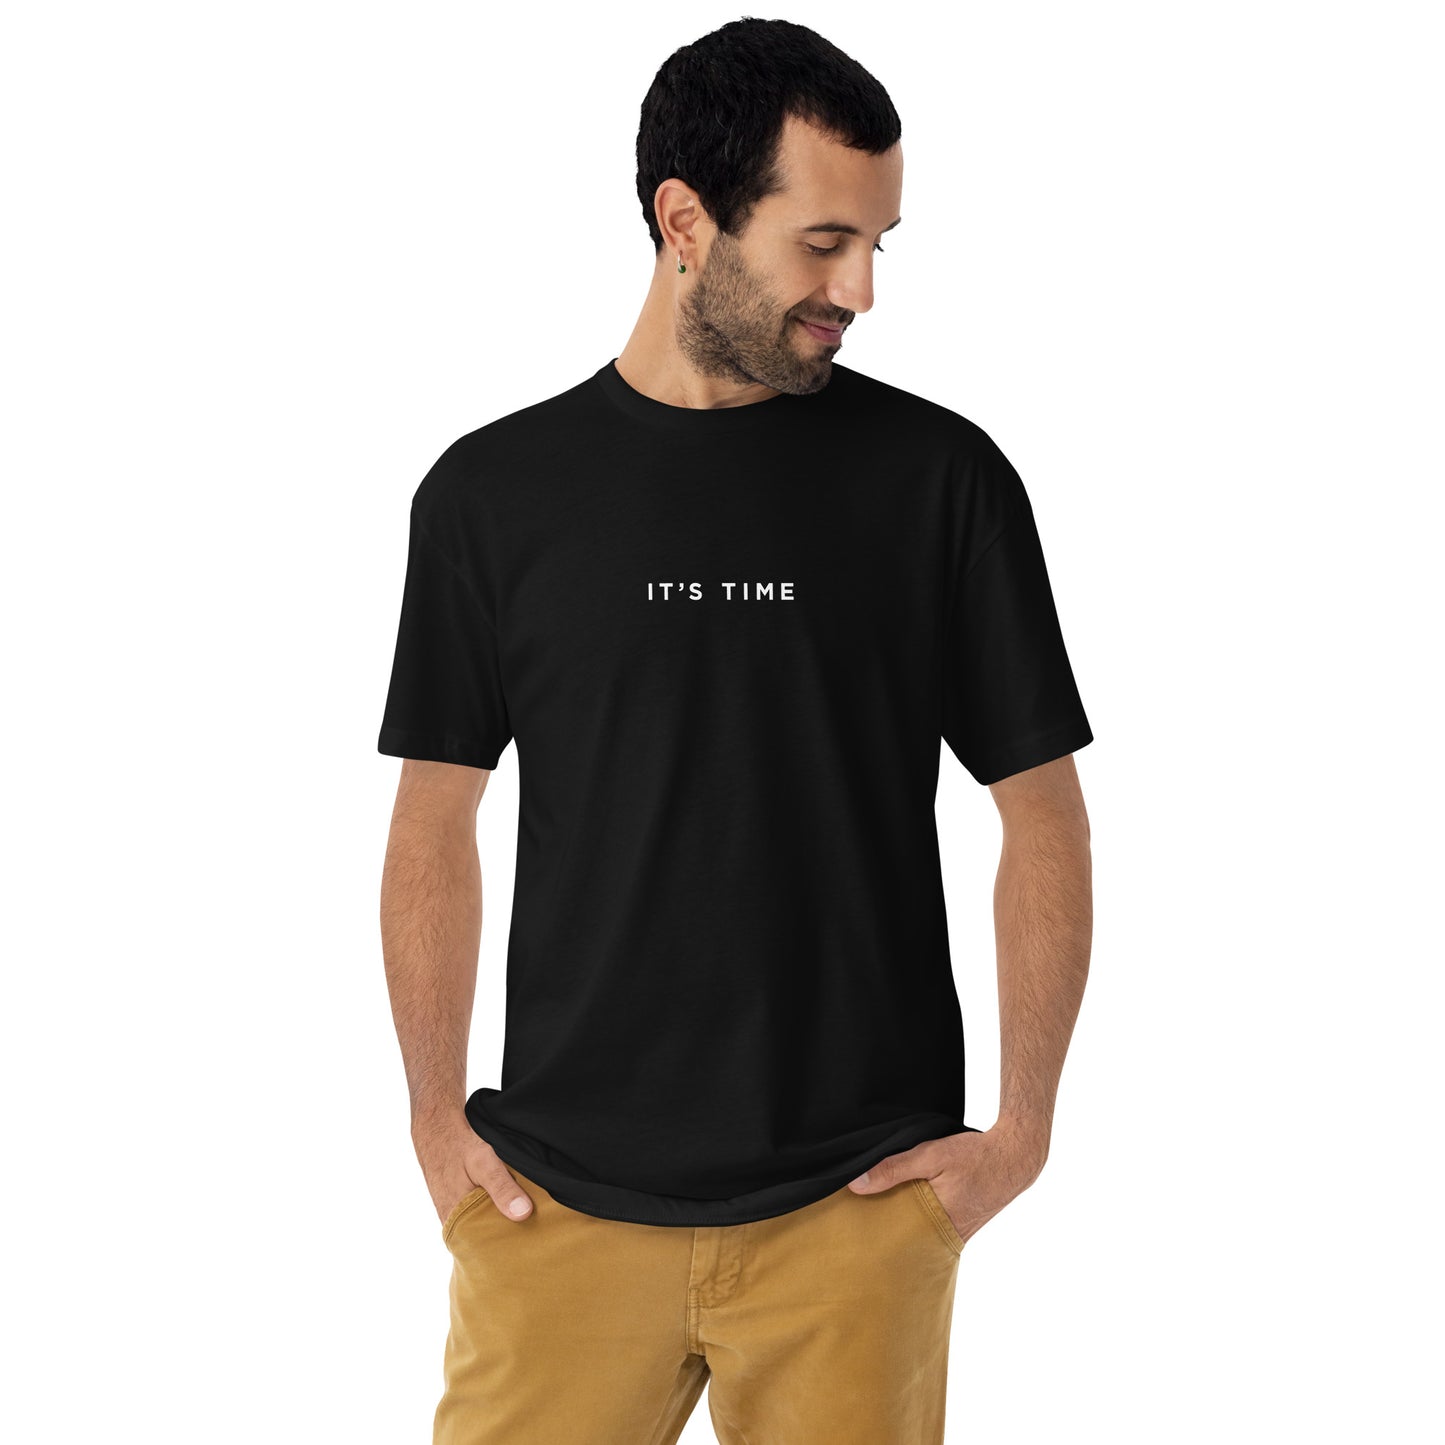 It's Time Men's Eco-Friendly Sustainable T-Shirt